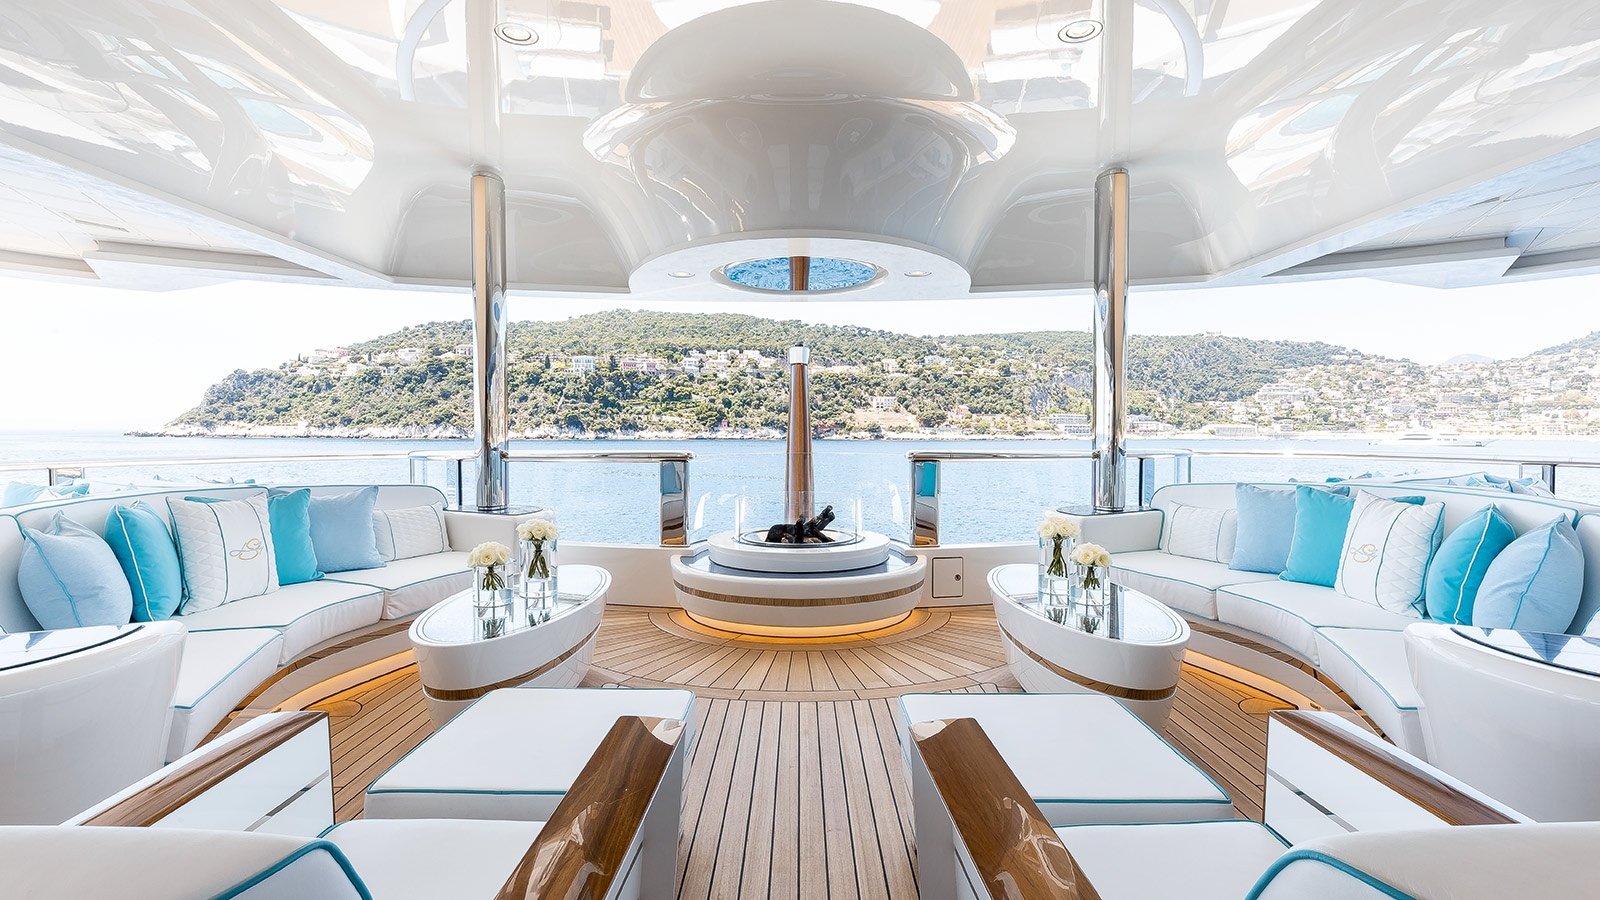 Amels Yacht Lady E interior